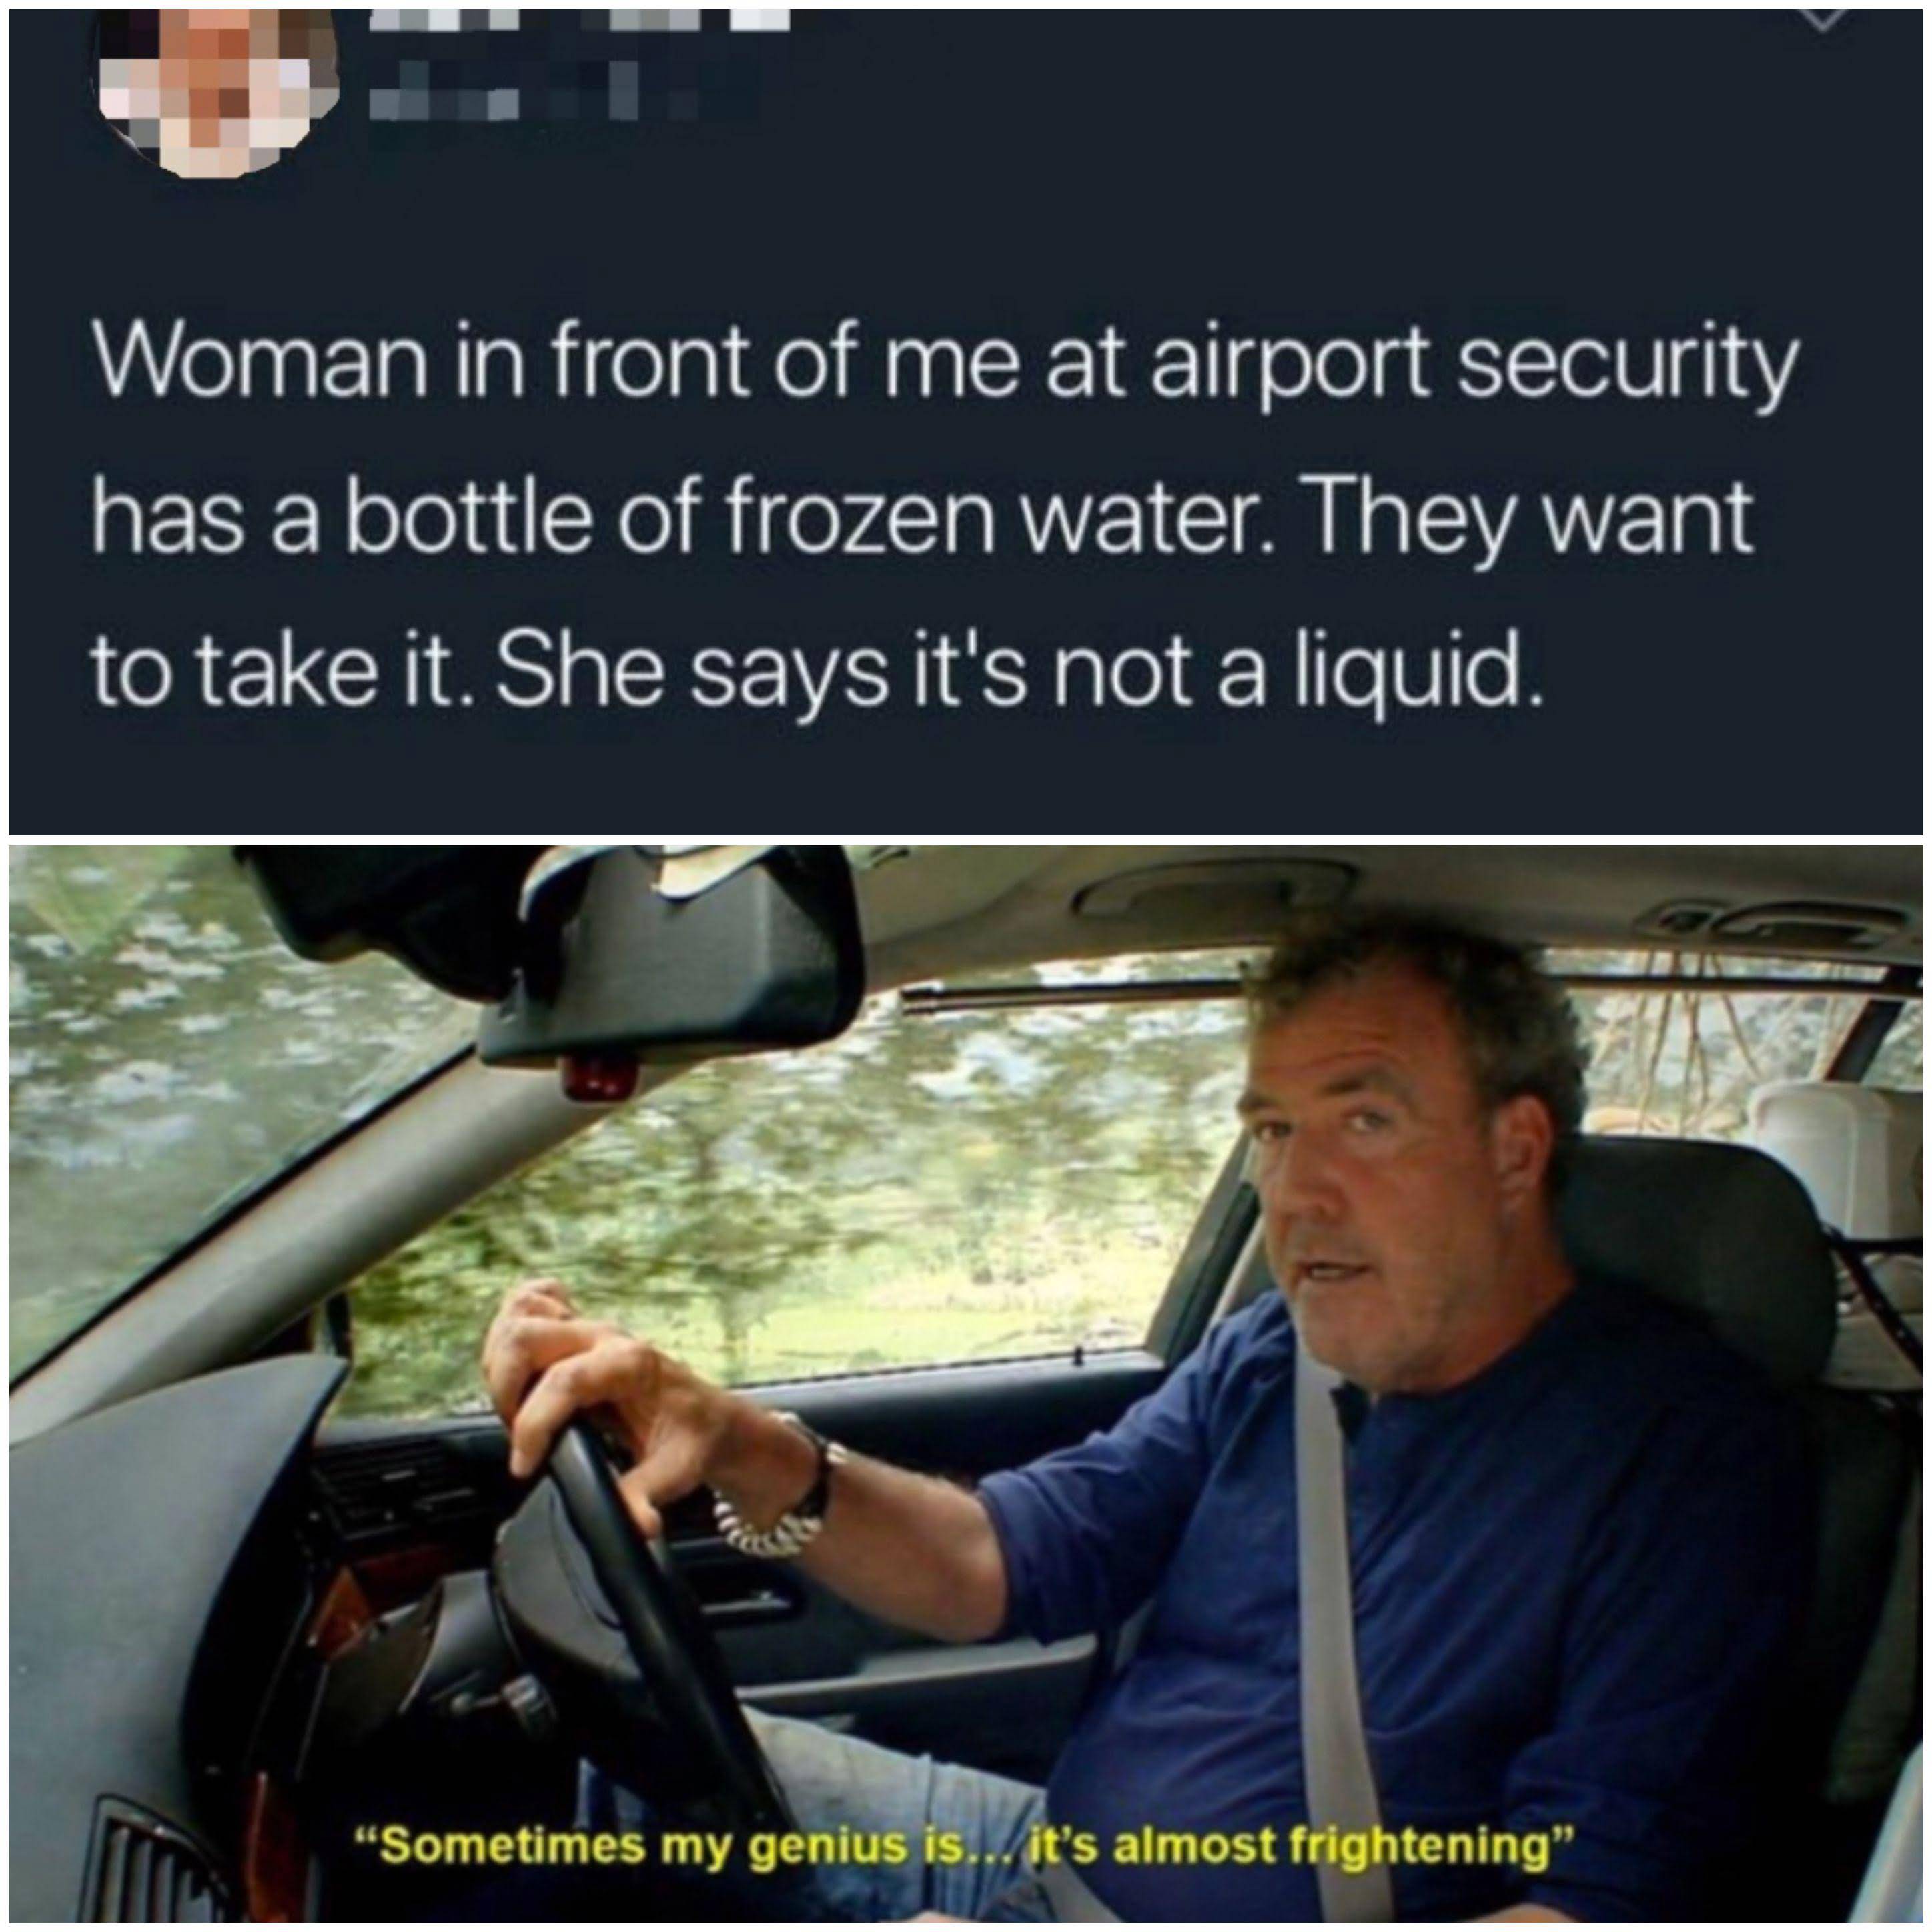 dank memes - sometimes my genius is almost frightening meme - Woman in front of me at airport security has a bottle of frozen water. They want to take it. She says it's not a liquid